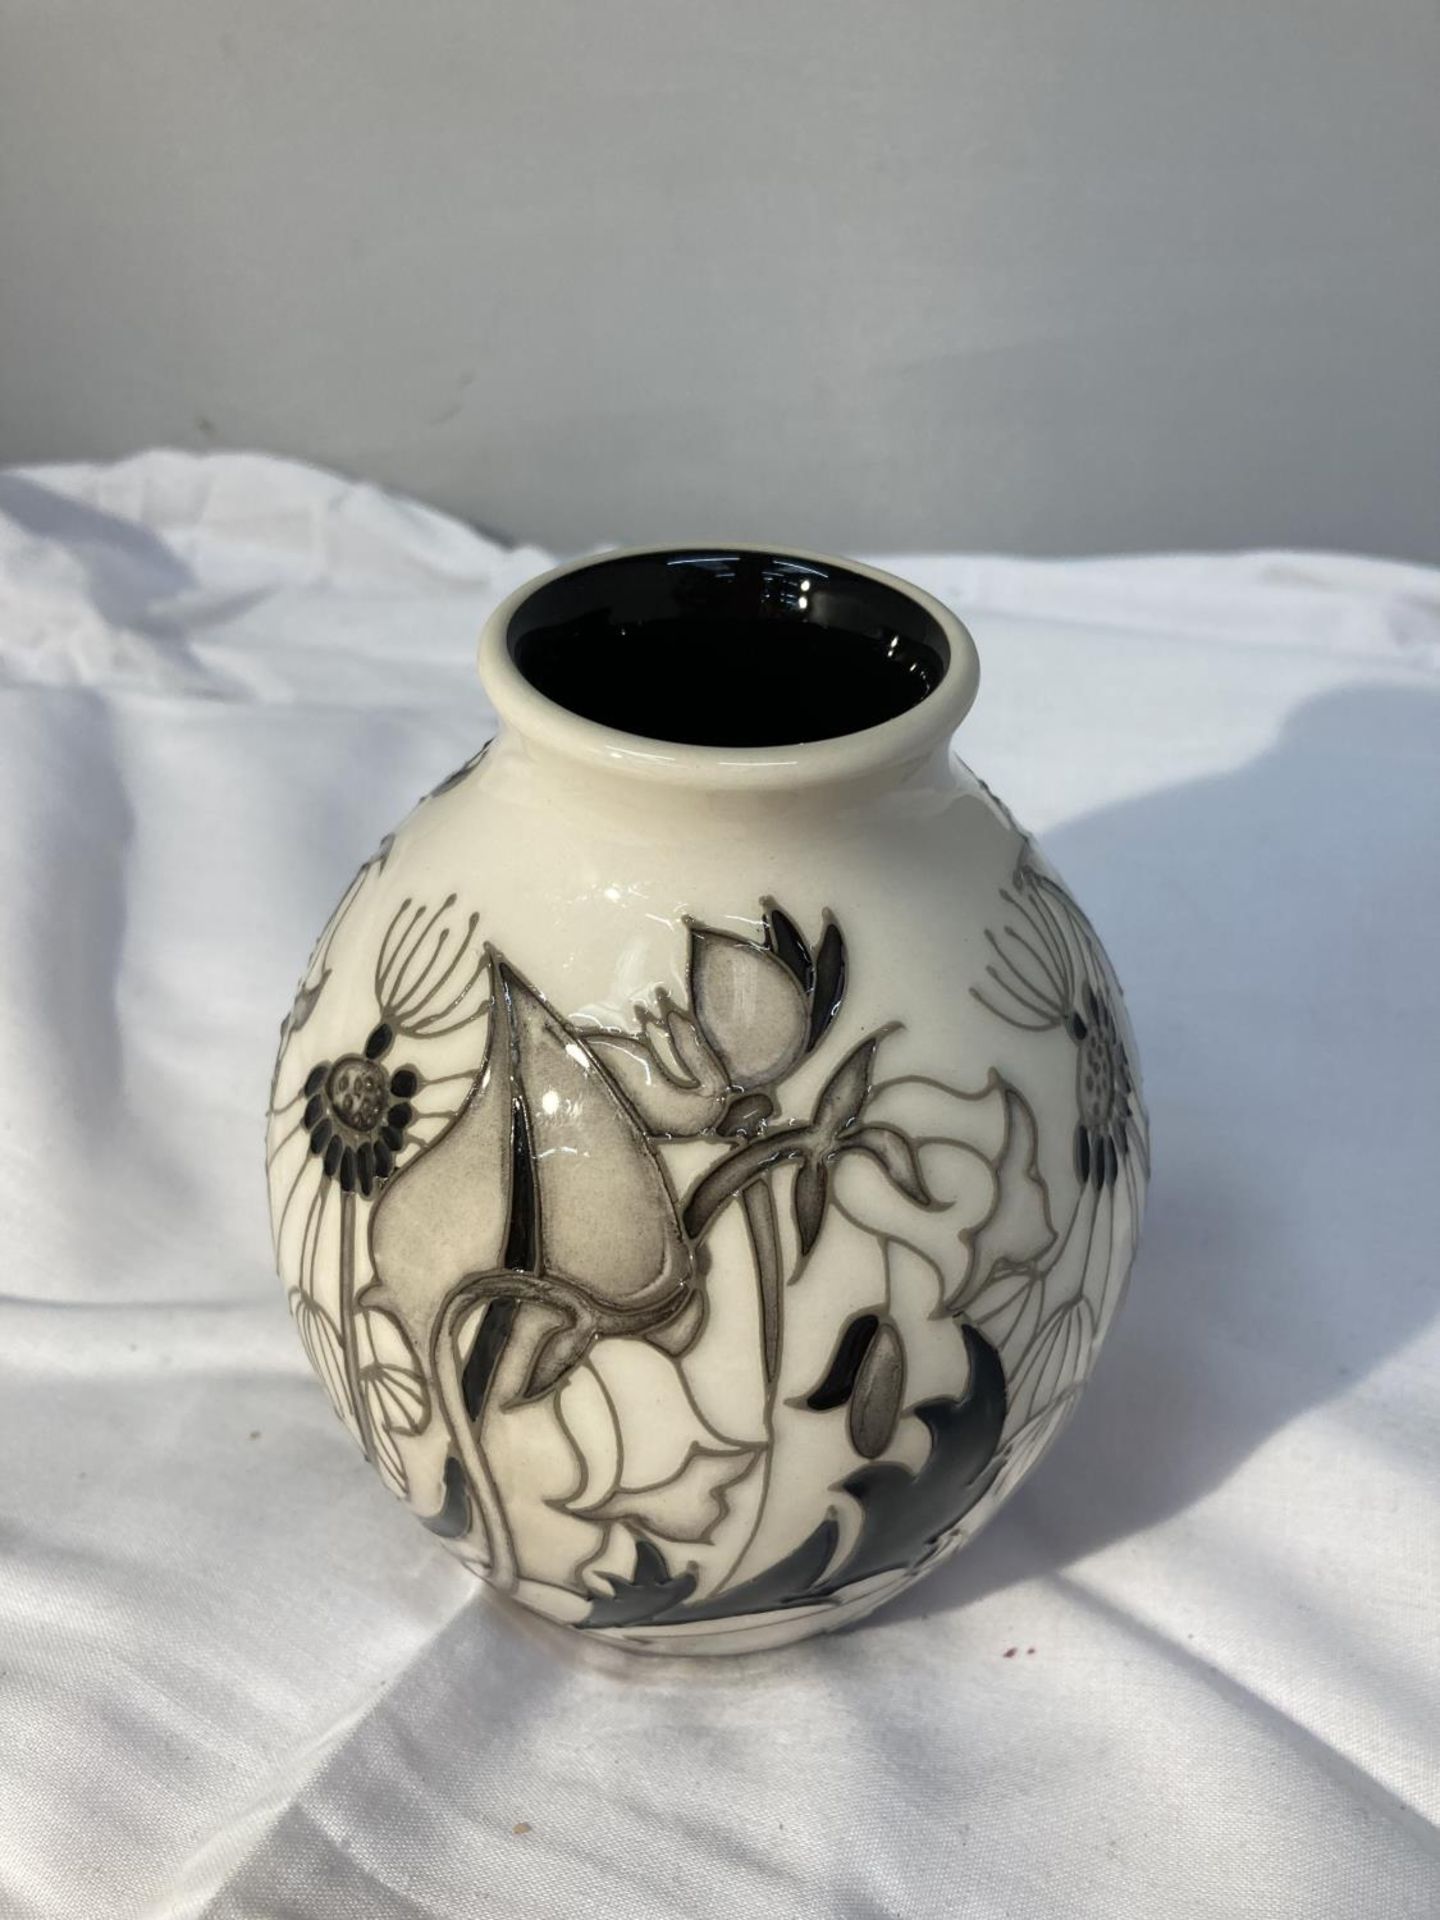 A MOORCROFT TRIAL VASE 6/11/18 BLACKTHORN 5 INCHES TALL - Image 3 of 5